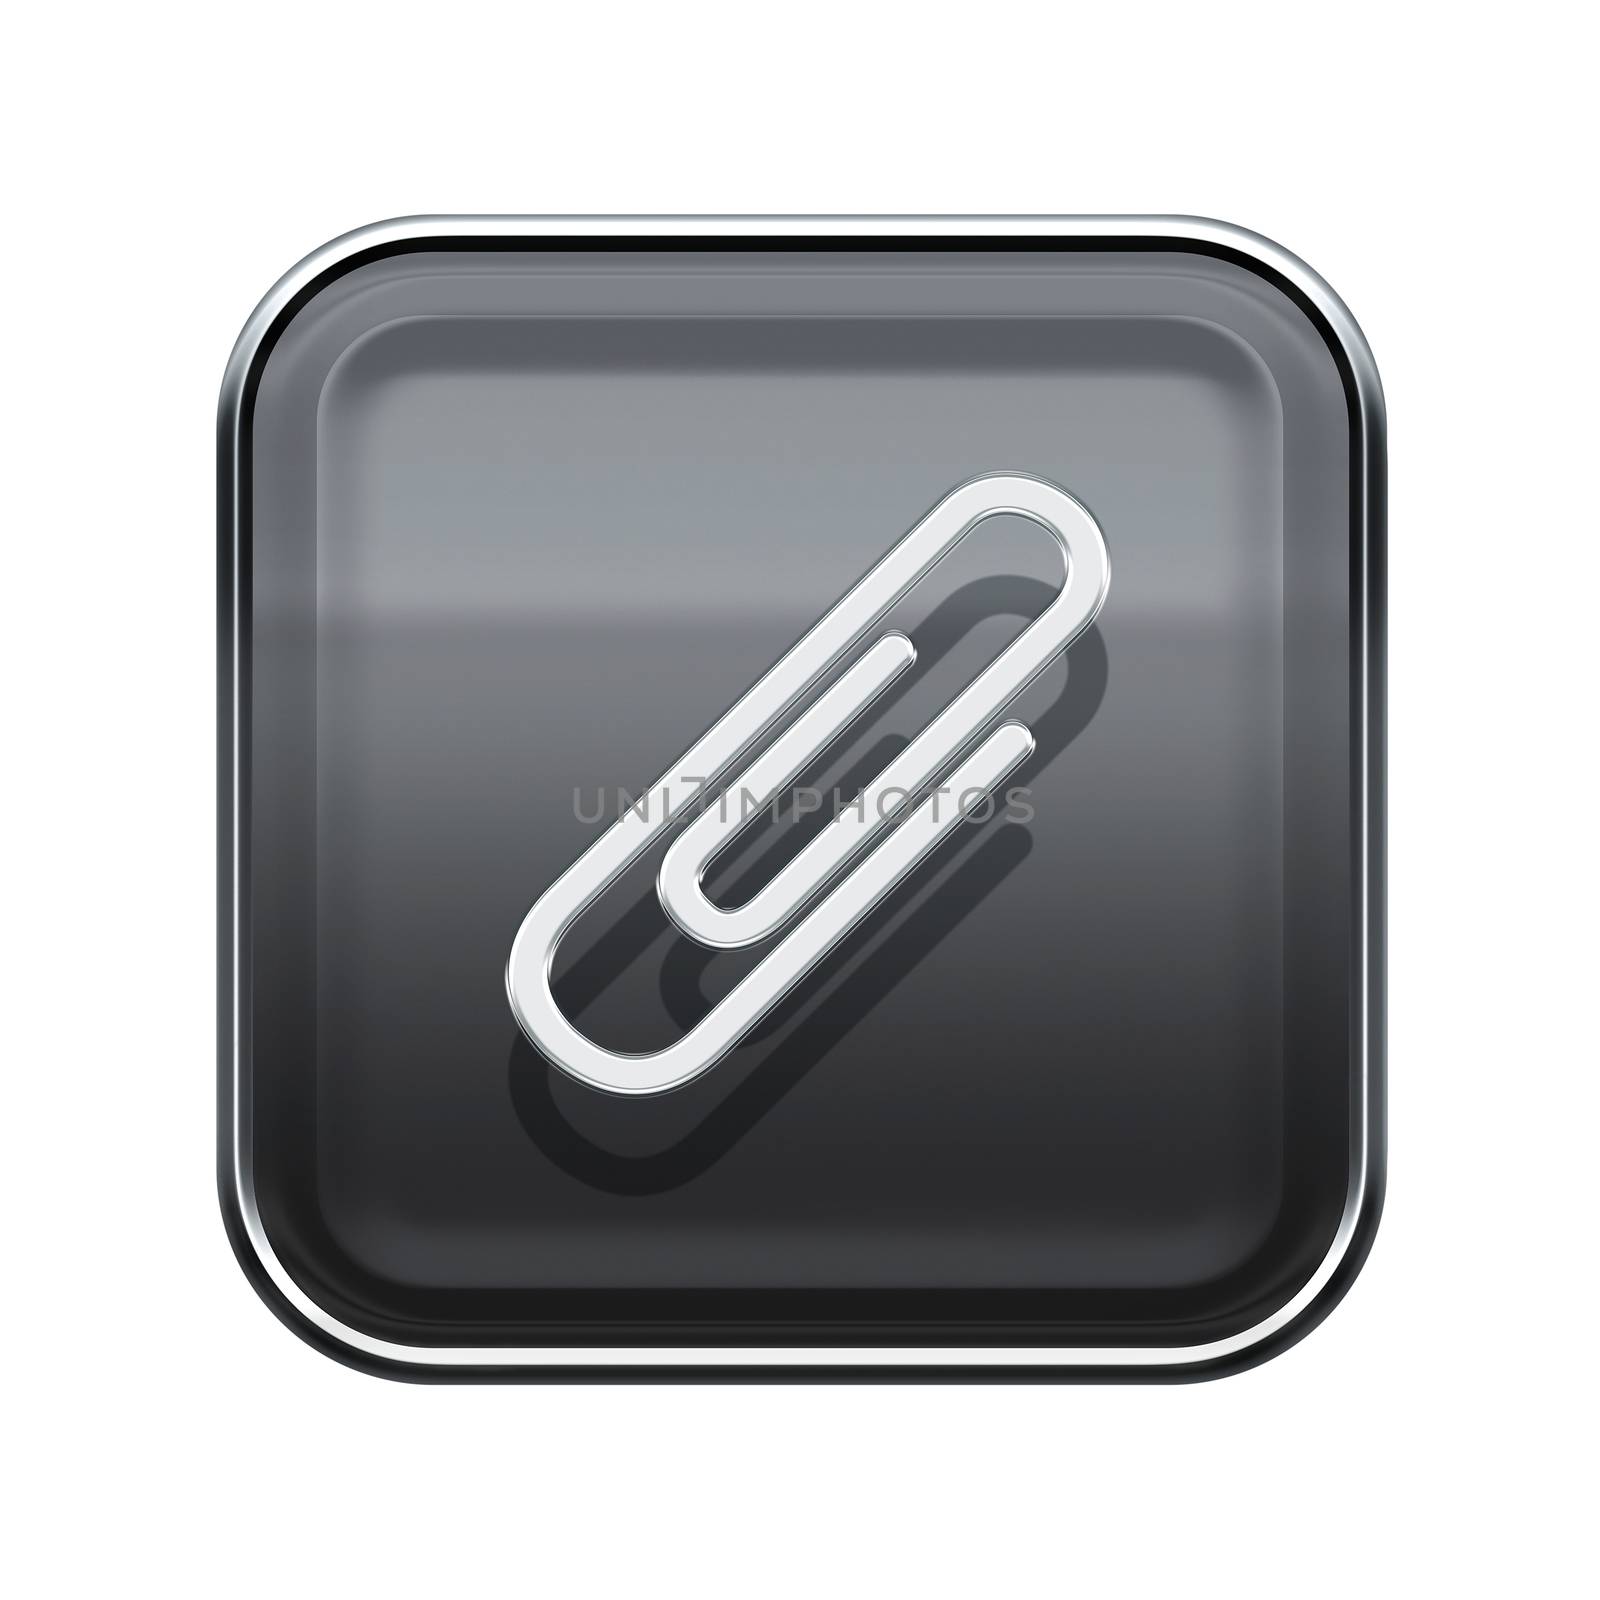 Paper clip icon glossy grey, isolated on white background